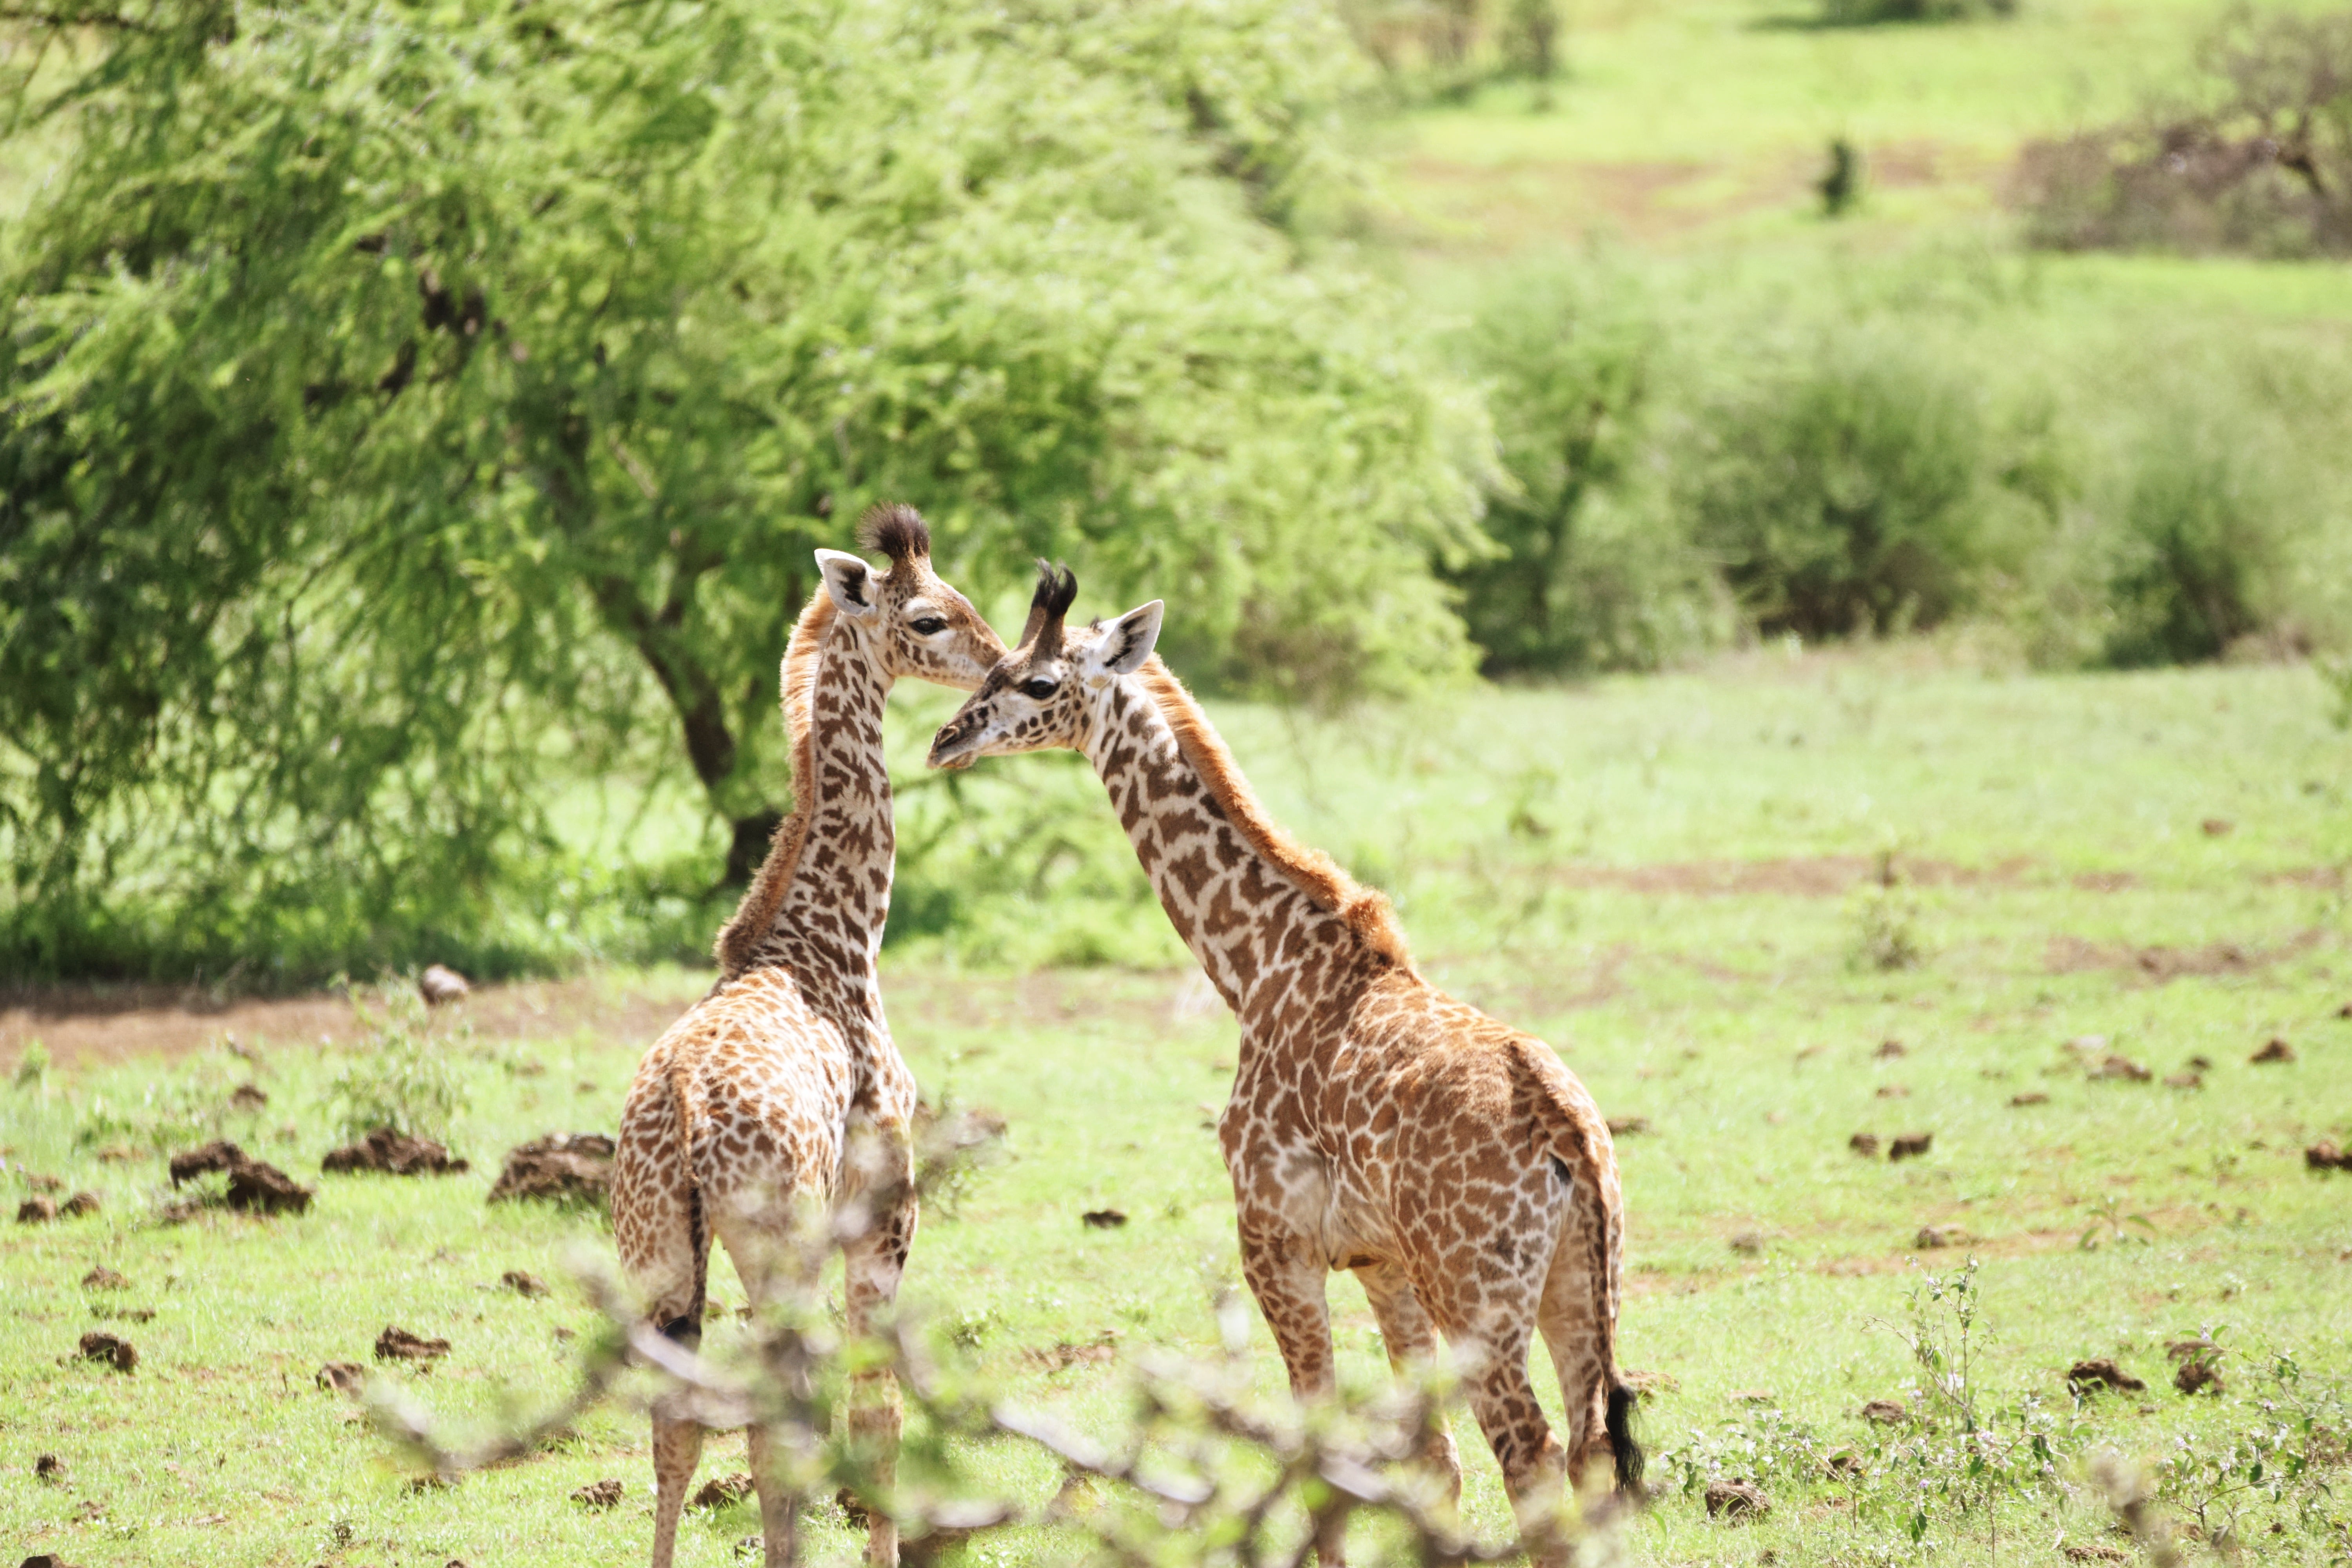 Photo Diary From Tsavo National Park - Photos to inspire a visit to Tsavo West National Park, the western half of Kenya's largest national park! | Tsavo National Park - Finch Hattons - Tsavo West National Park - Kenya National Parks - Tsavo Kenya - Tsavo East National Park 